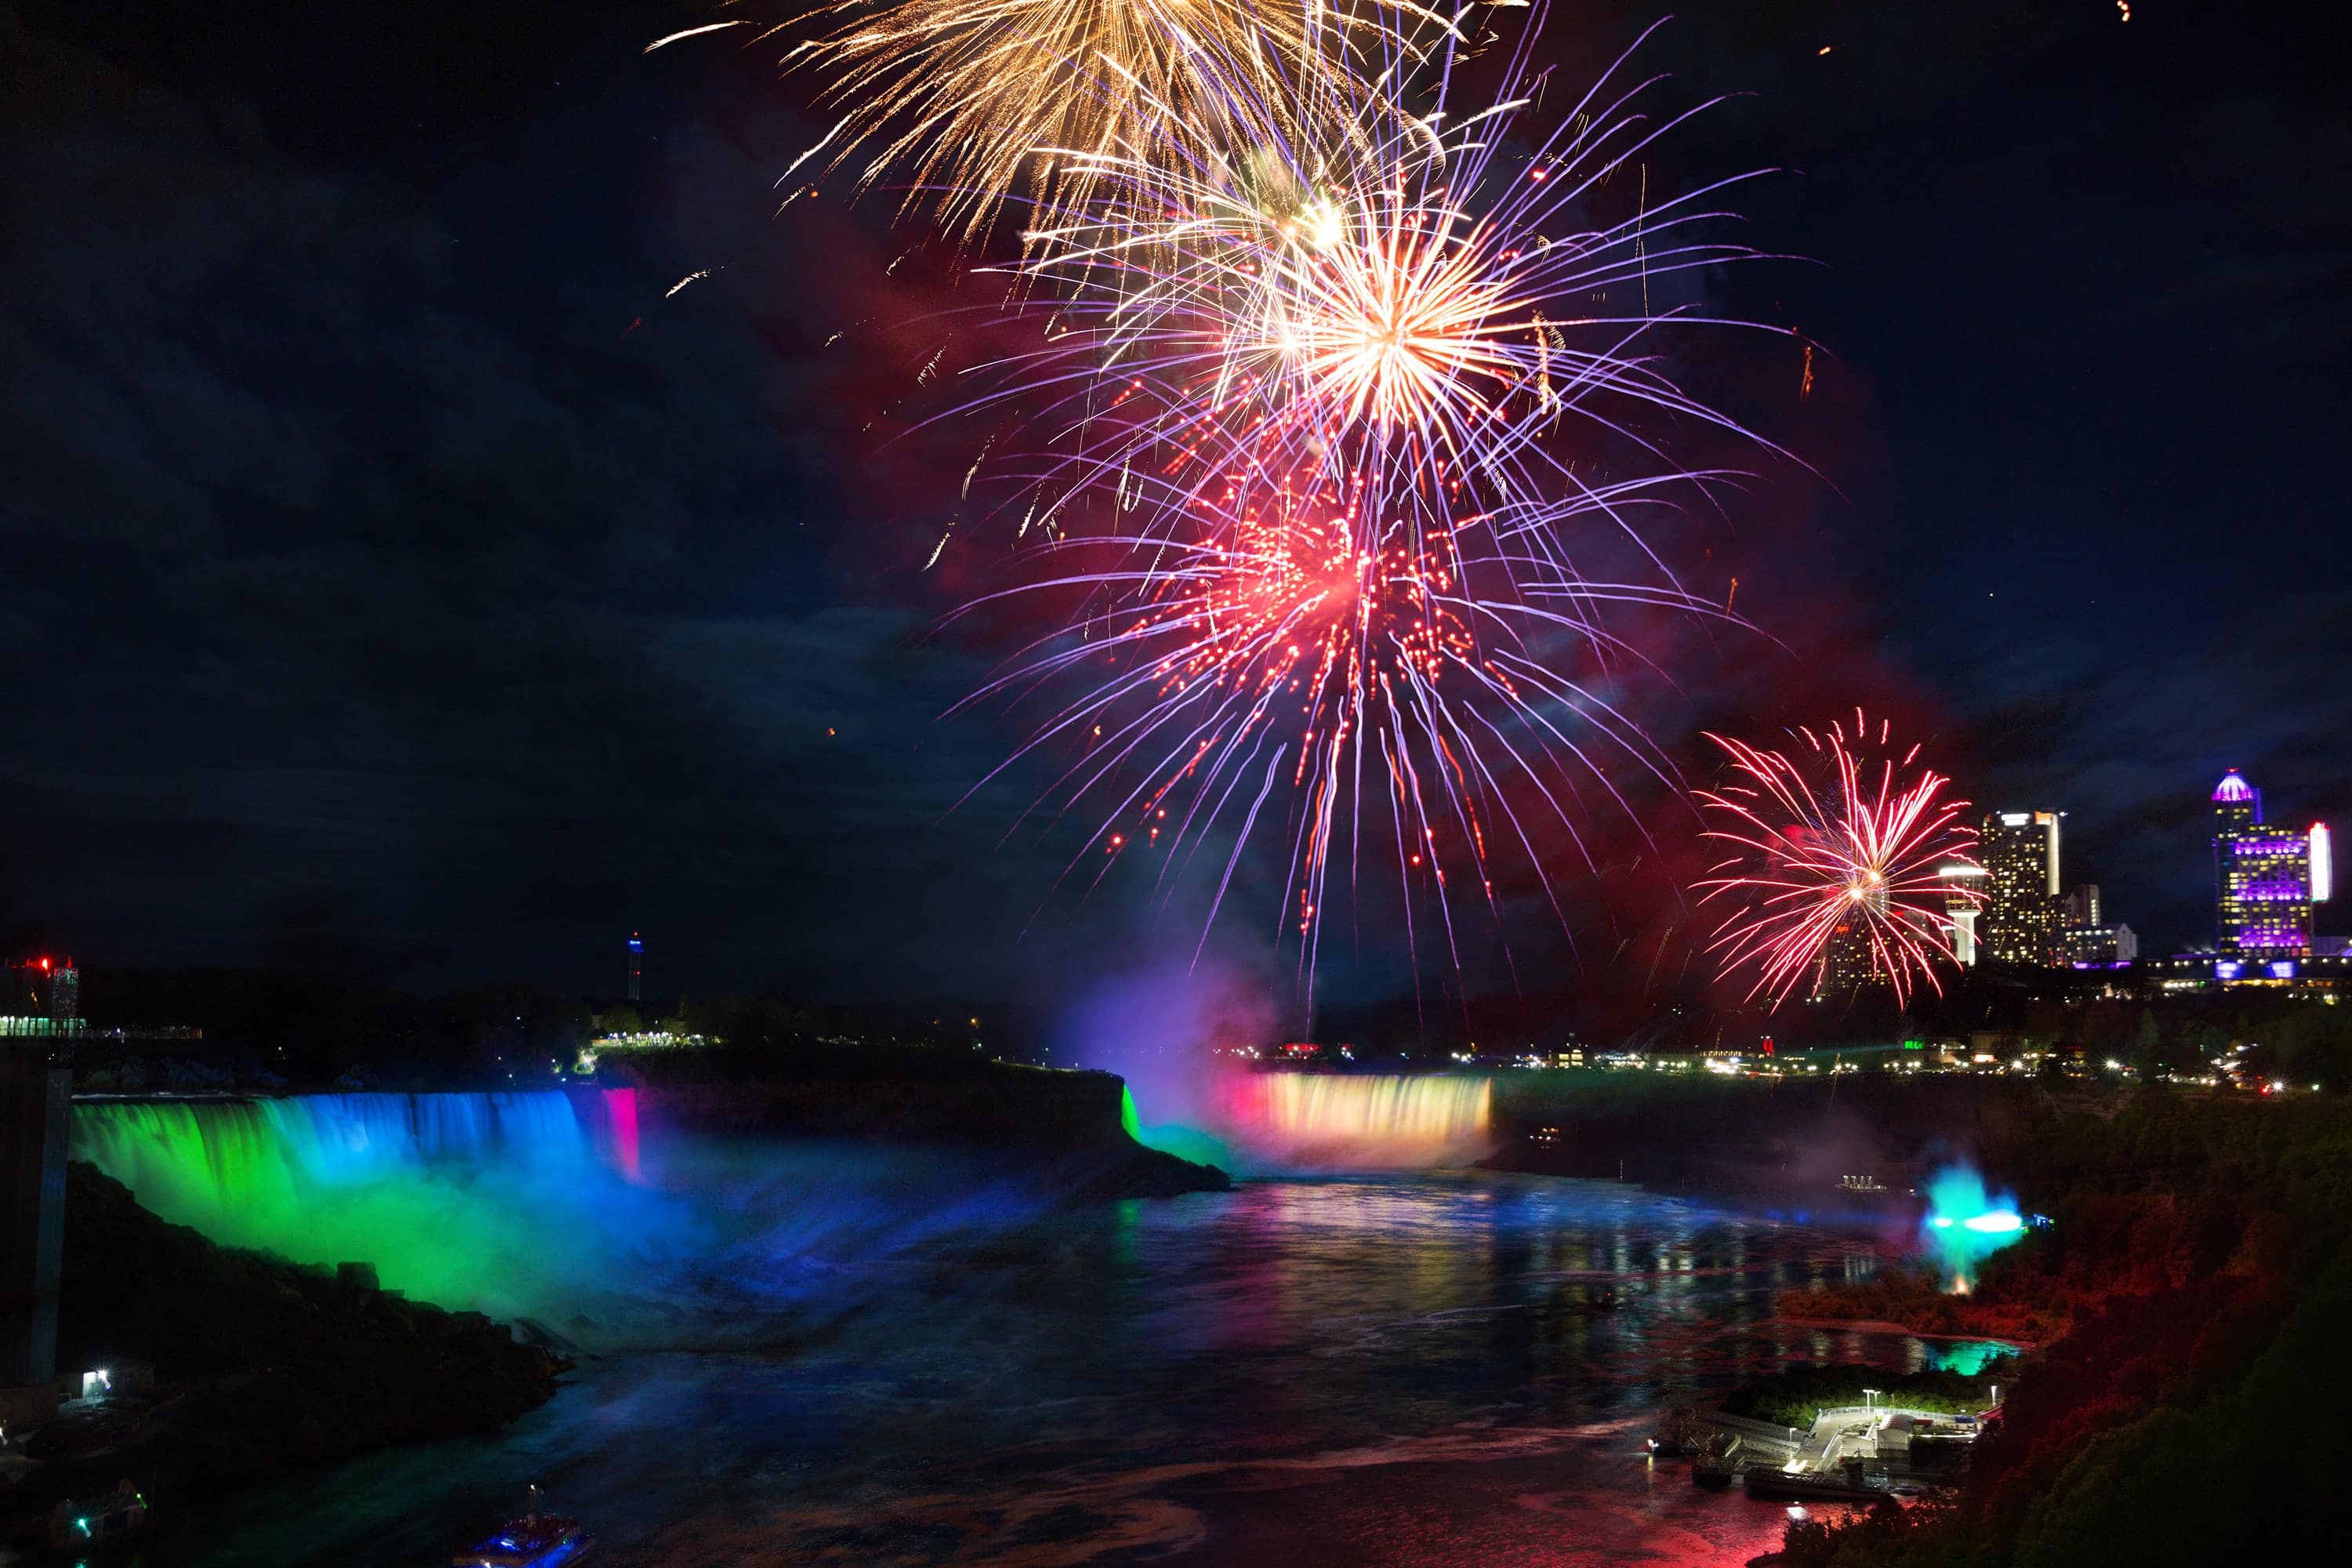 Niagara Falls Fireworks Niagara Falls Niagara Falls Attractions